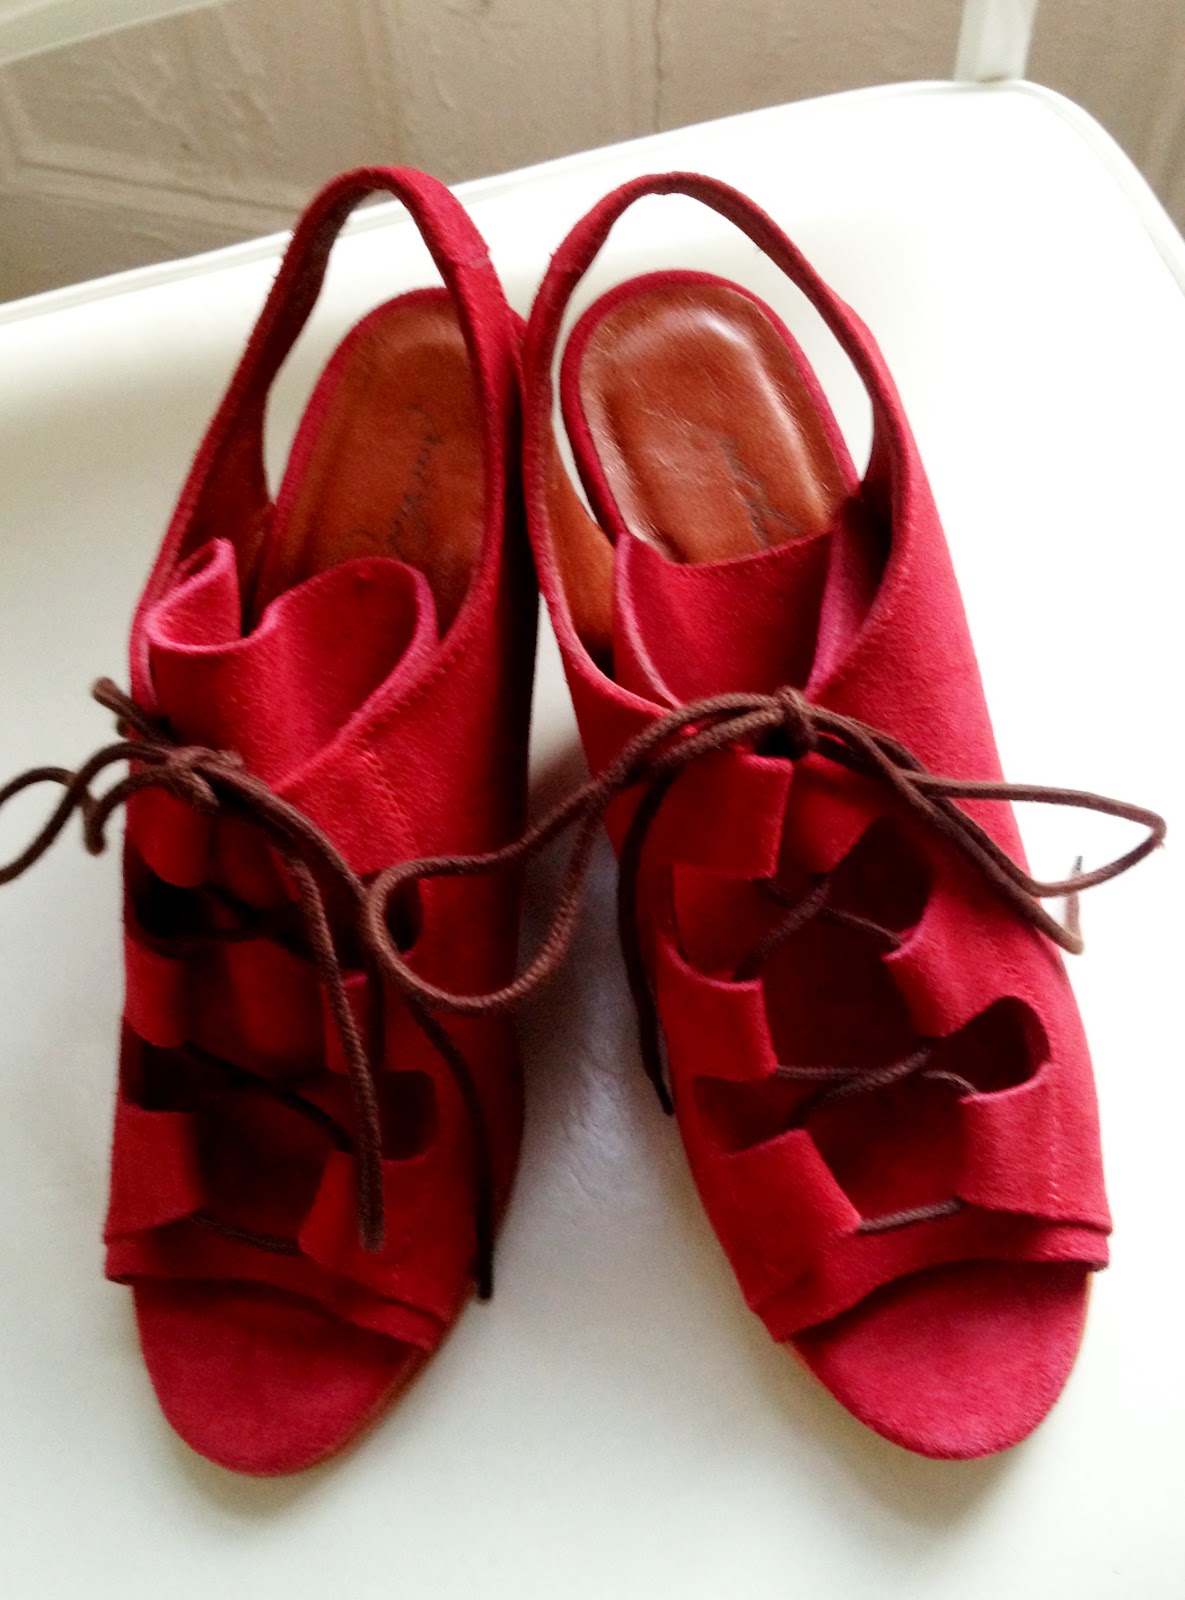 laws of general economy: Rachel Comey Taper Suede Wedges- NIB 6.5 (REDUCED)